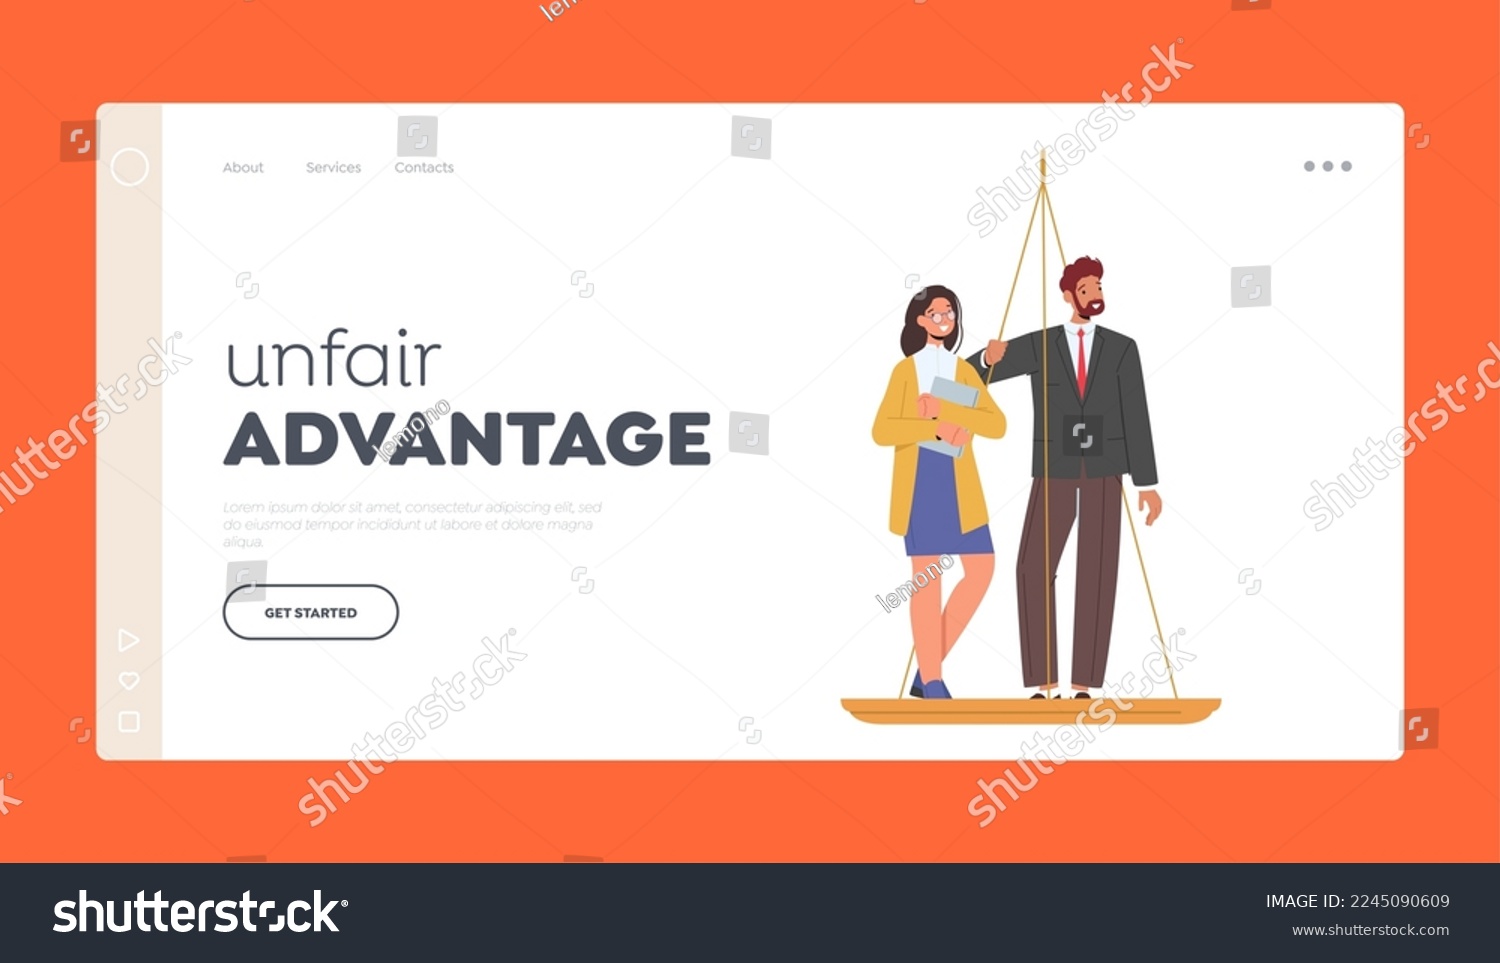 Unfair Advantages Landing Page Template. Inequality and Imbalance Concept. Male and Female Characters Stand on Scales, Business Man or Woman Unequal Salary. Cartoon People Vector Illustration #2245090609